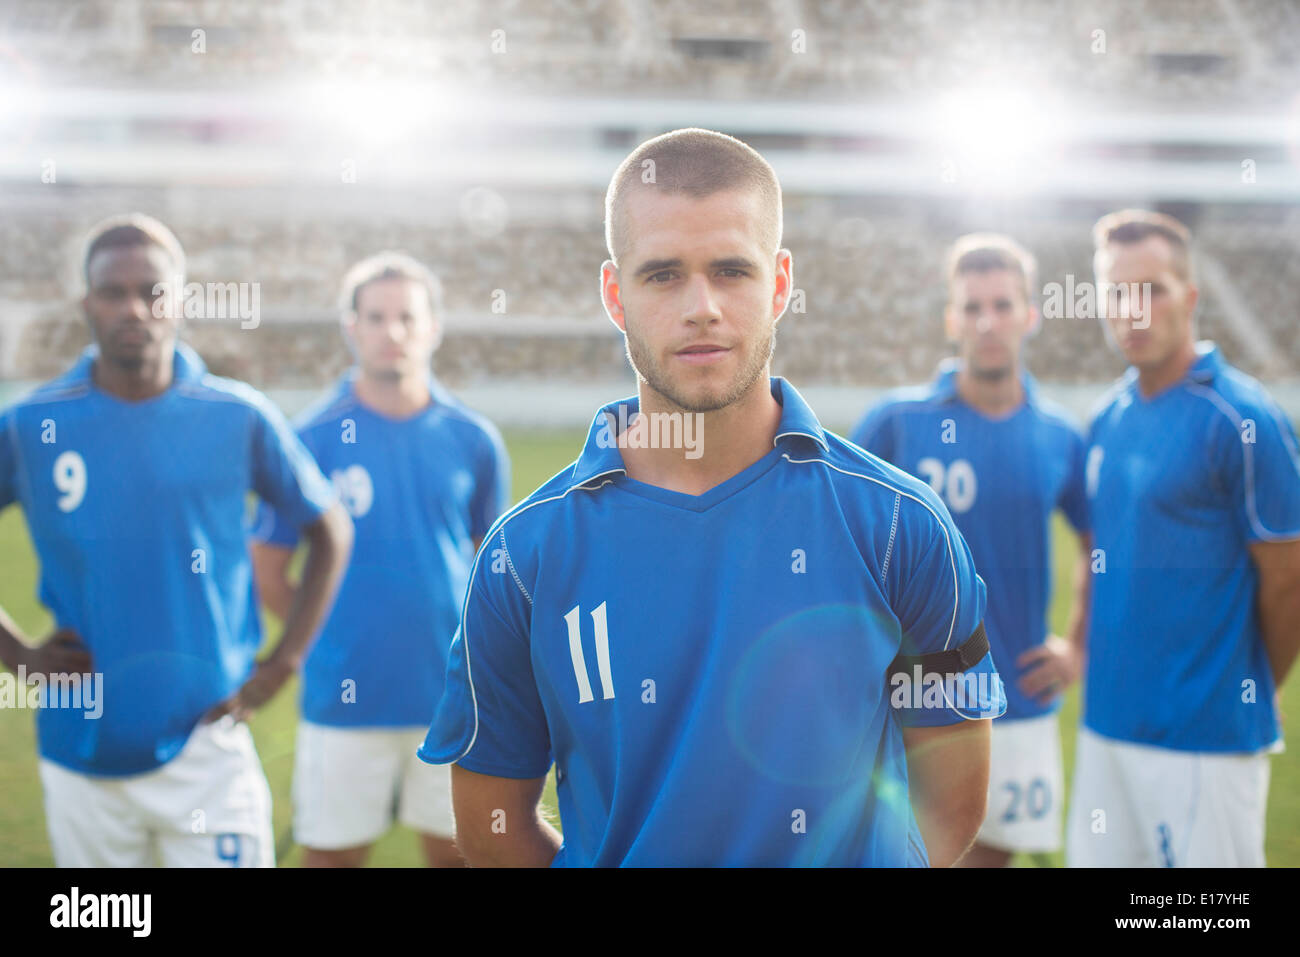 Soccer players standing on field Stock Photo